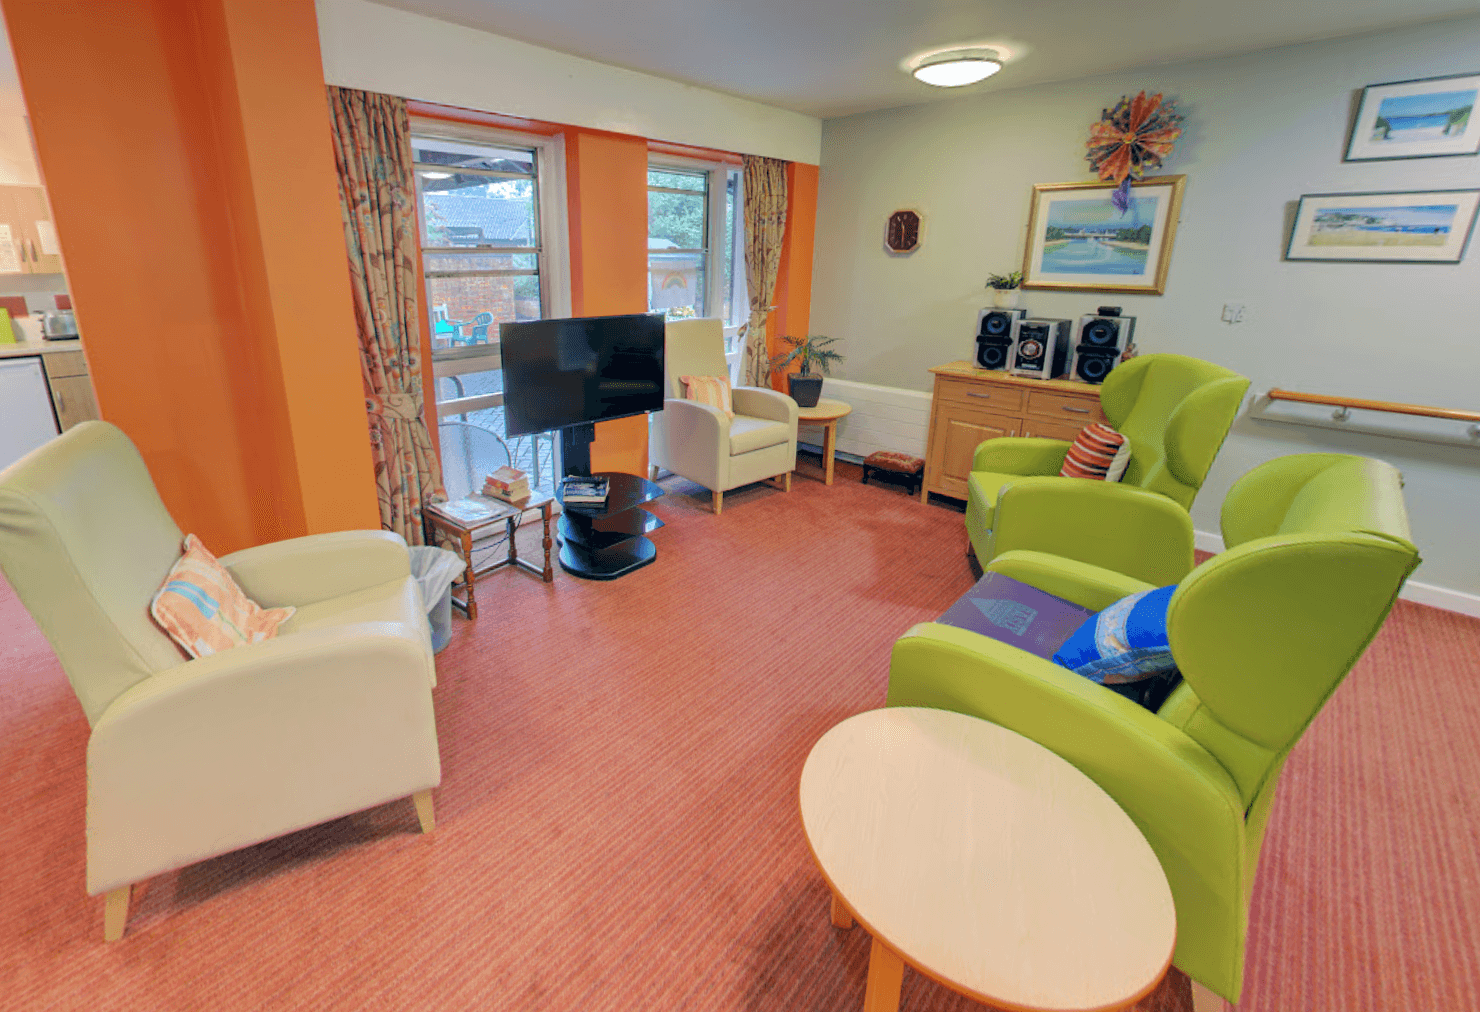 Shaw Healthcare - Victoria House care home 003